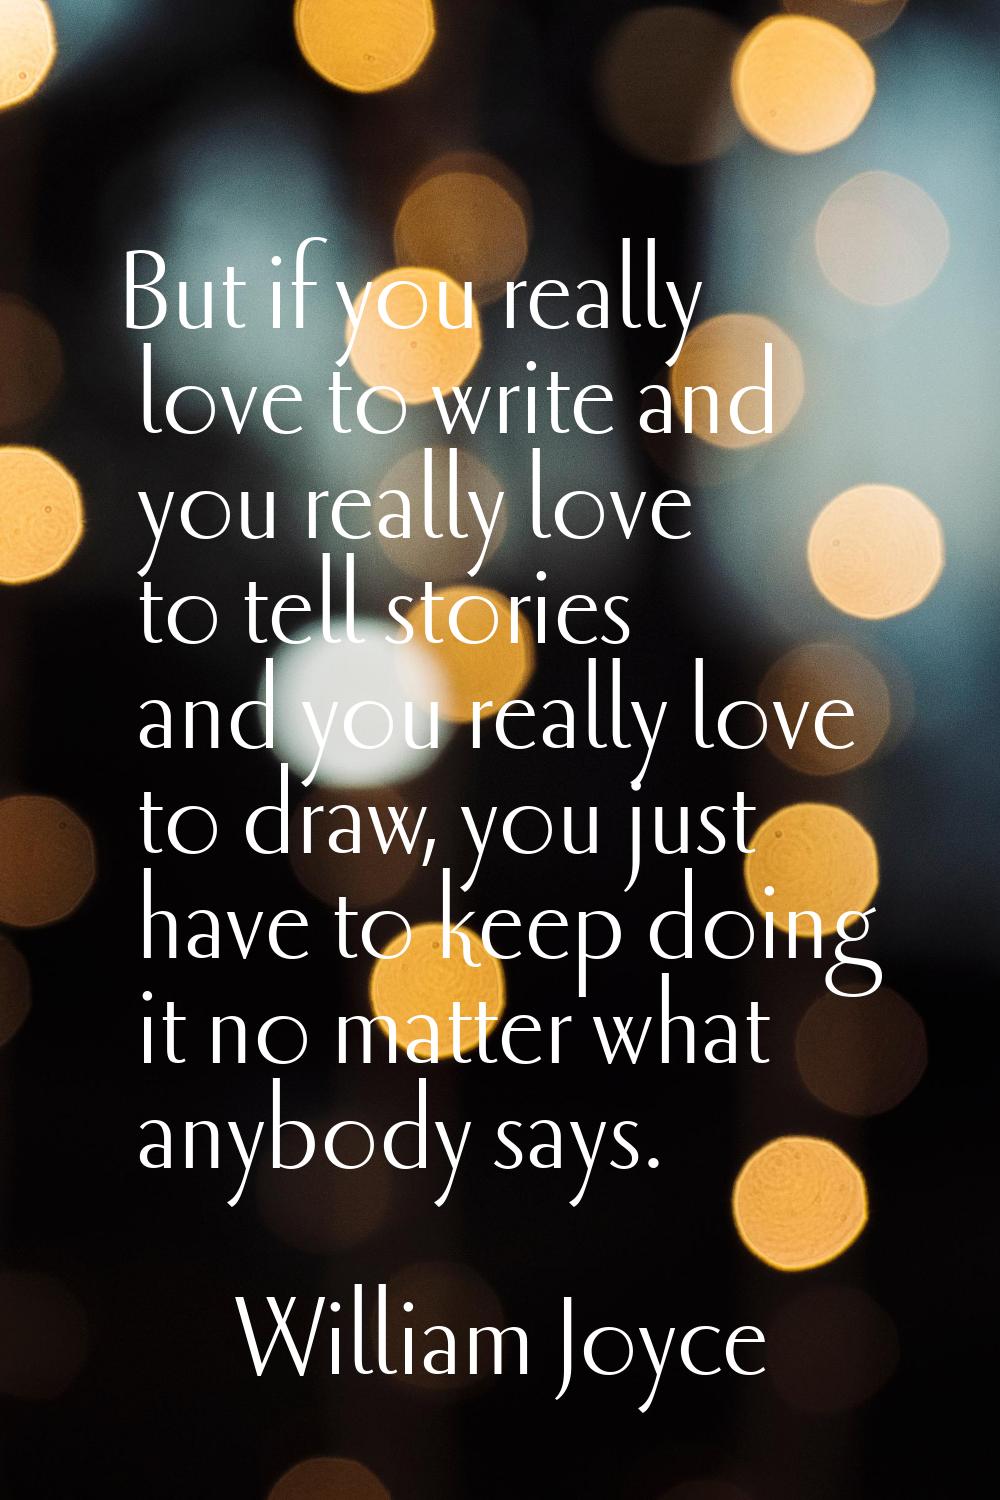 But if you really love to write and you really love to tell stories and you really love to draw, yo